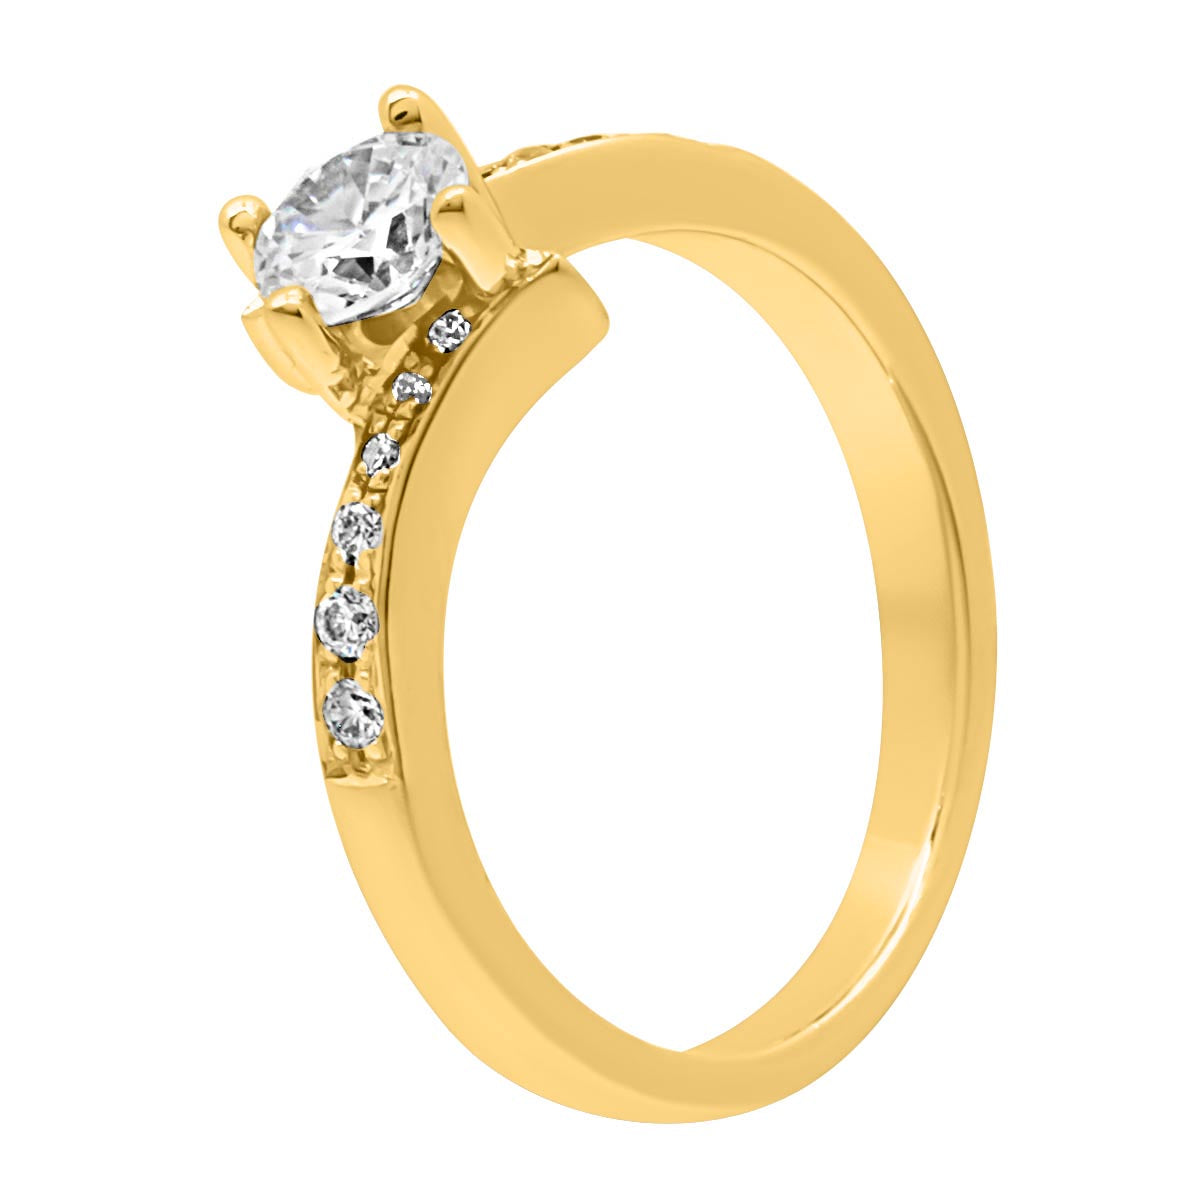 Quirky Diamond Engagement Ring in yellow gold and at an angle